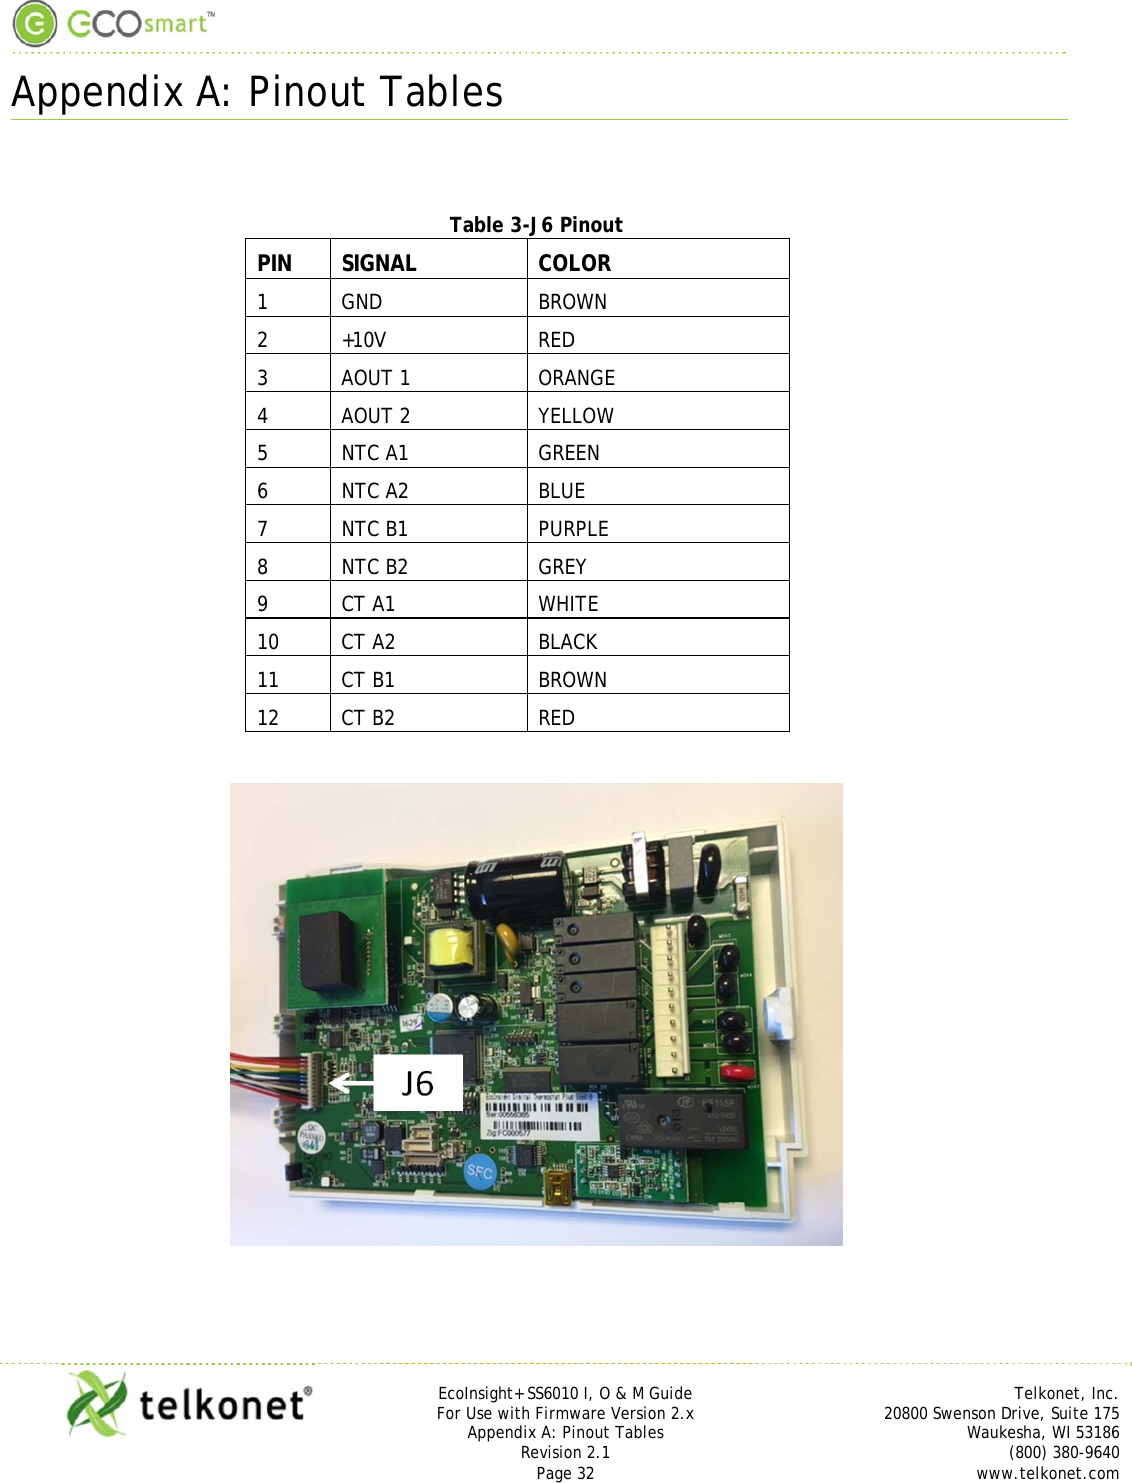  Appendix A: Pinout Tables     EcoInsight+ SS6010 I, O &amp; M Guide Telkonet, Inc. For Use with Firmware Version 2.x 20800 Swenson Drive, Suite 175 Appendix A: Pinout Tables Waukesha, WI 53186 Revision 2.1   (800) 380-9640 Page 32  www.telkonet.com   Table 3-J6 Pinout PIN SIGNAL  COLOR 1 GND  BROWN 2 +10V  RED 3 AOUT 1  ORANGE 4 AOUT 2  YELLOW 5 NTC A1  GREEN 6 NTC A2  BLUE 7 NTC B1  PURPLE 8 NTC B2  GREY 9 CT A1  WHITE 10 CT A2  BLACK 11 CT B1  BROWN 12 CT B2  RED     